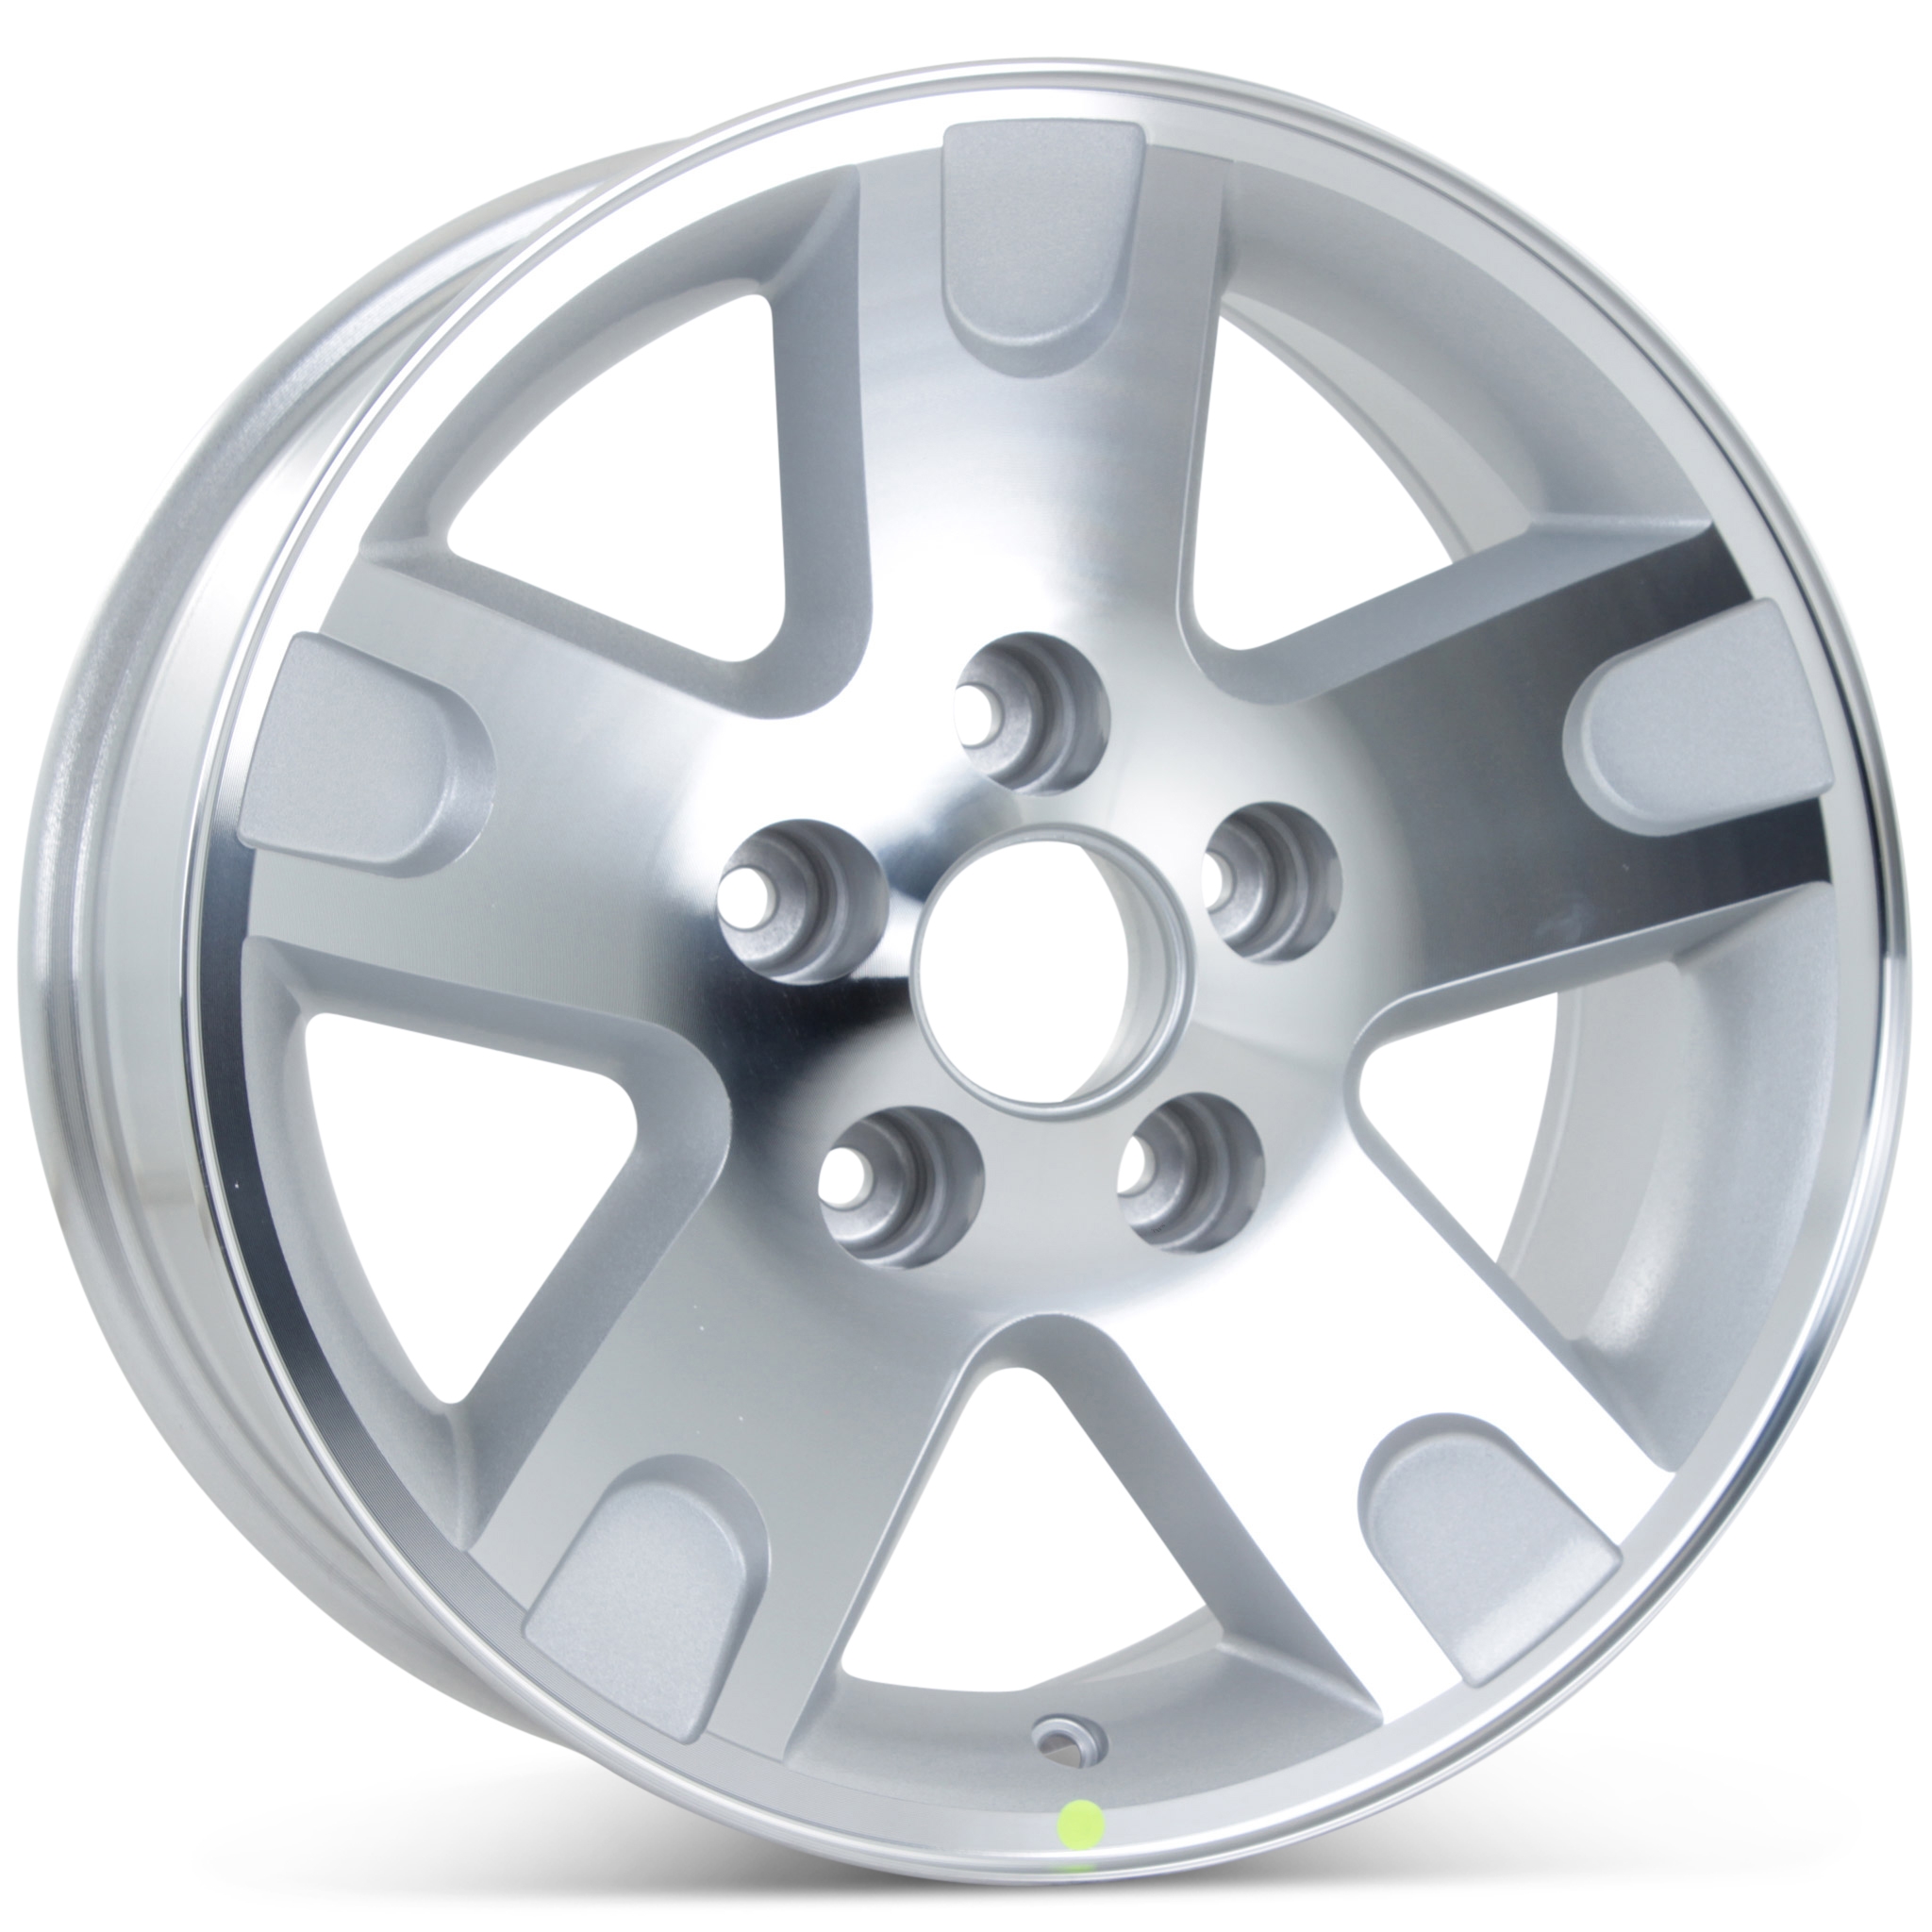 New 17" Alloy Replacement Wheel for Ford F-150 F150 2002.